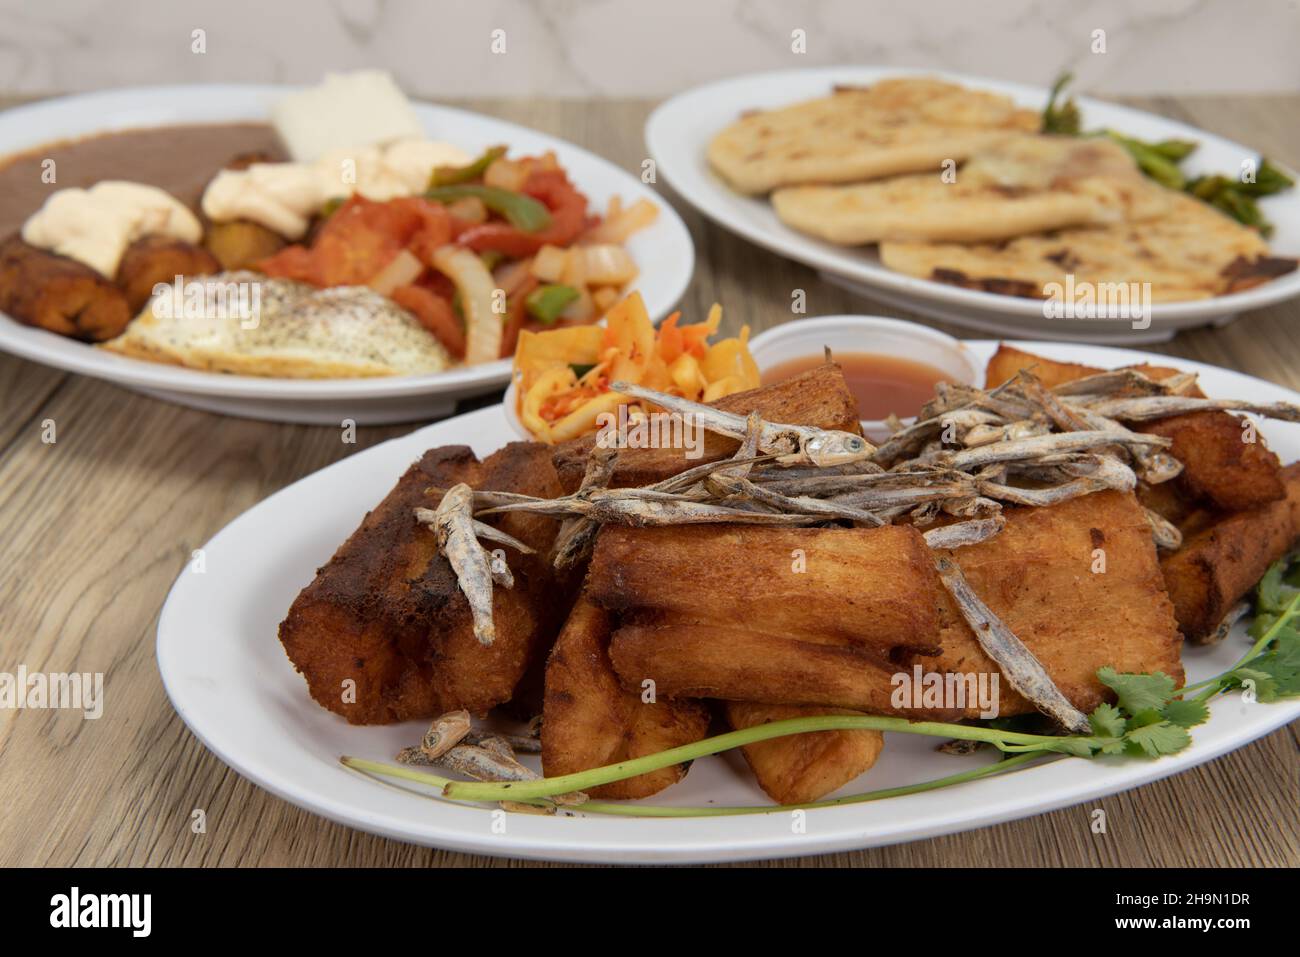 Latino flavored table of prepared El Salvadoran food with meat, fried plantains, pupusa, yucca, and refried beans. Stock Photo